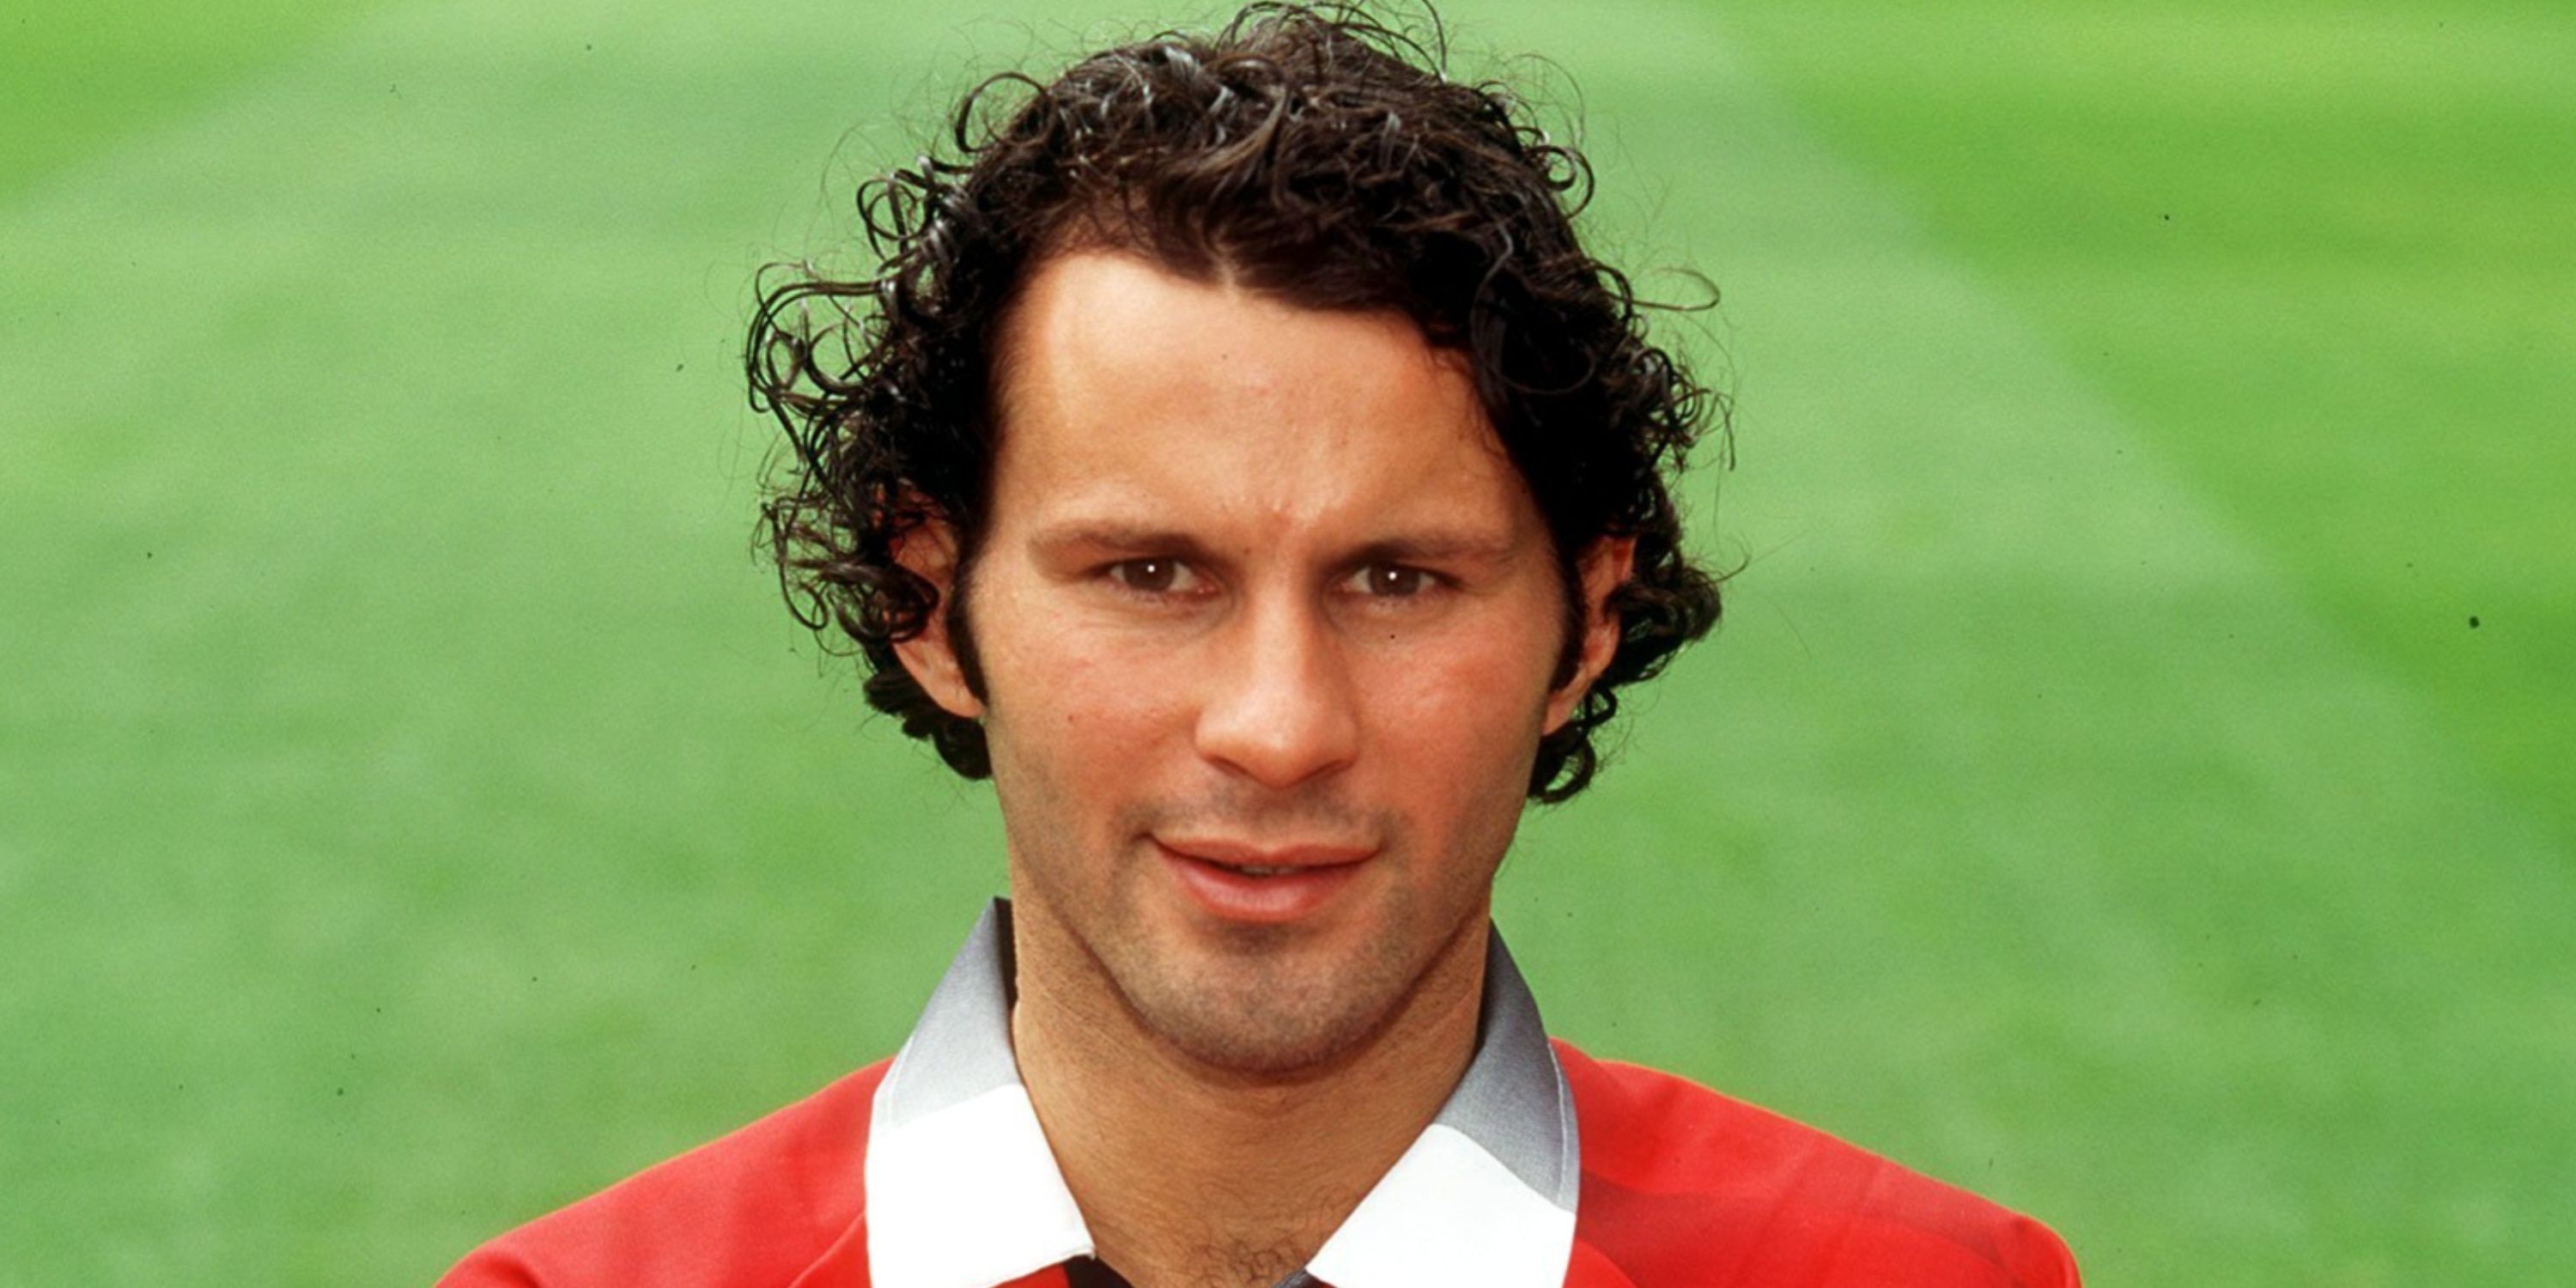 Ryan Giggs in action for Manchester United